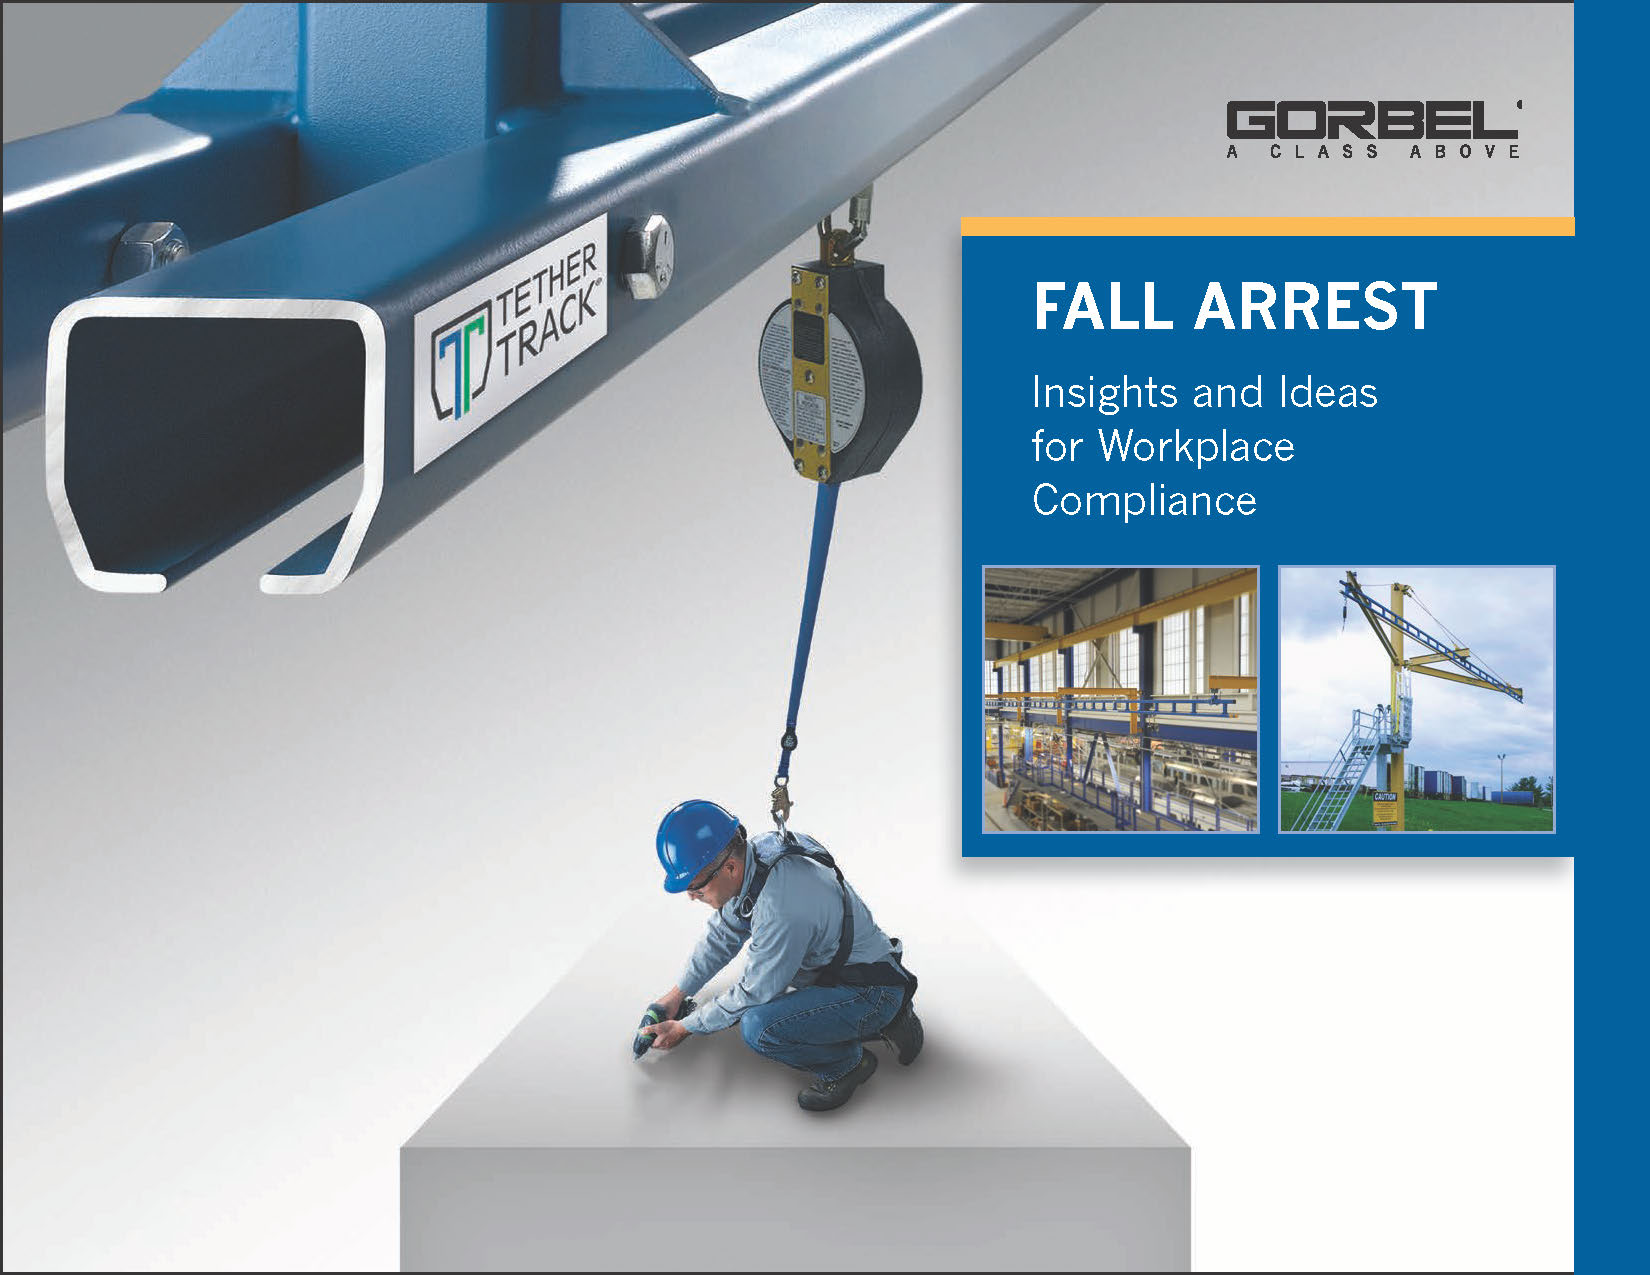 Pages from gorbel_fall_arrest_insights_ideas_for_workplace_compliance